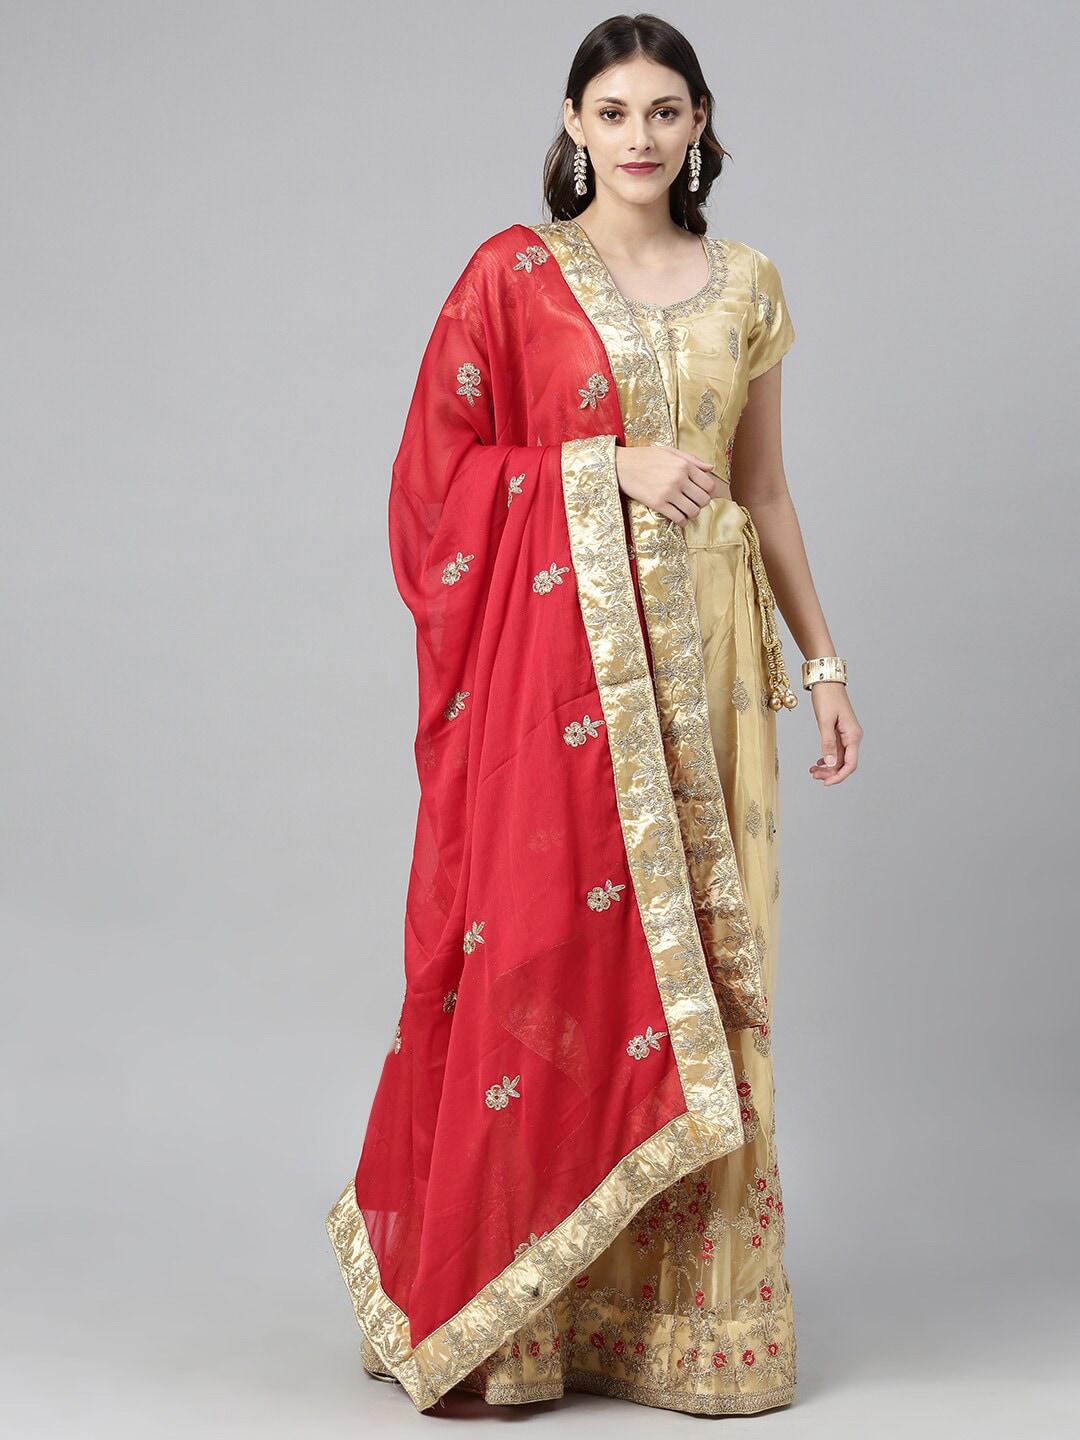 the-chennai-silks-gold-toned-&-red-embroidered-ready-to-wear-lehenga-choli-with-dupatta